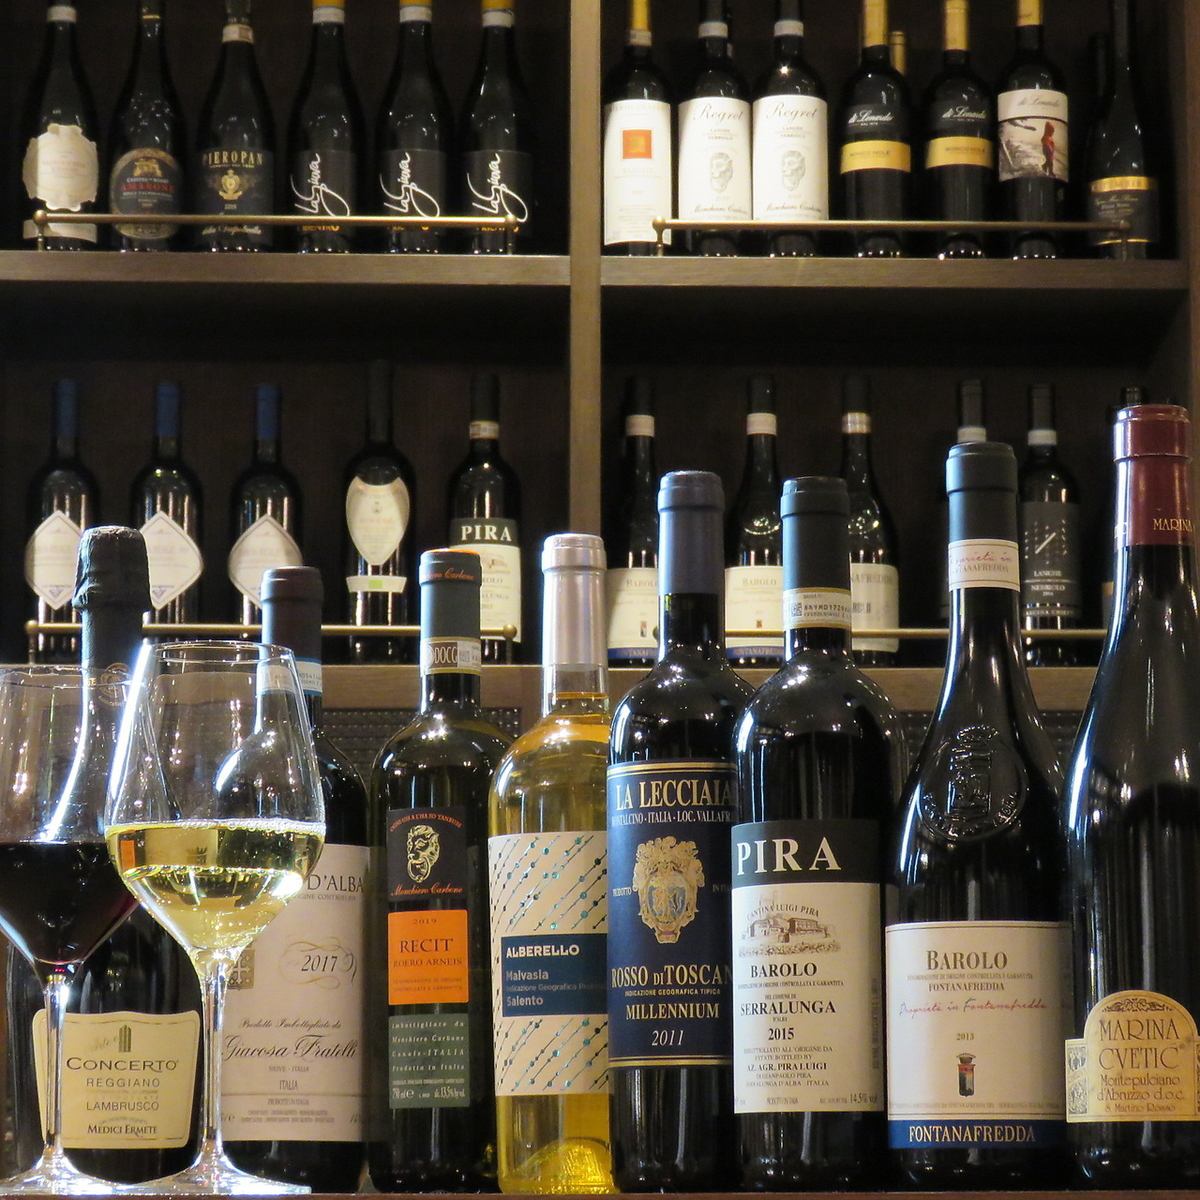 We always have over 100 types of wine in stock!